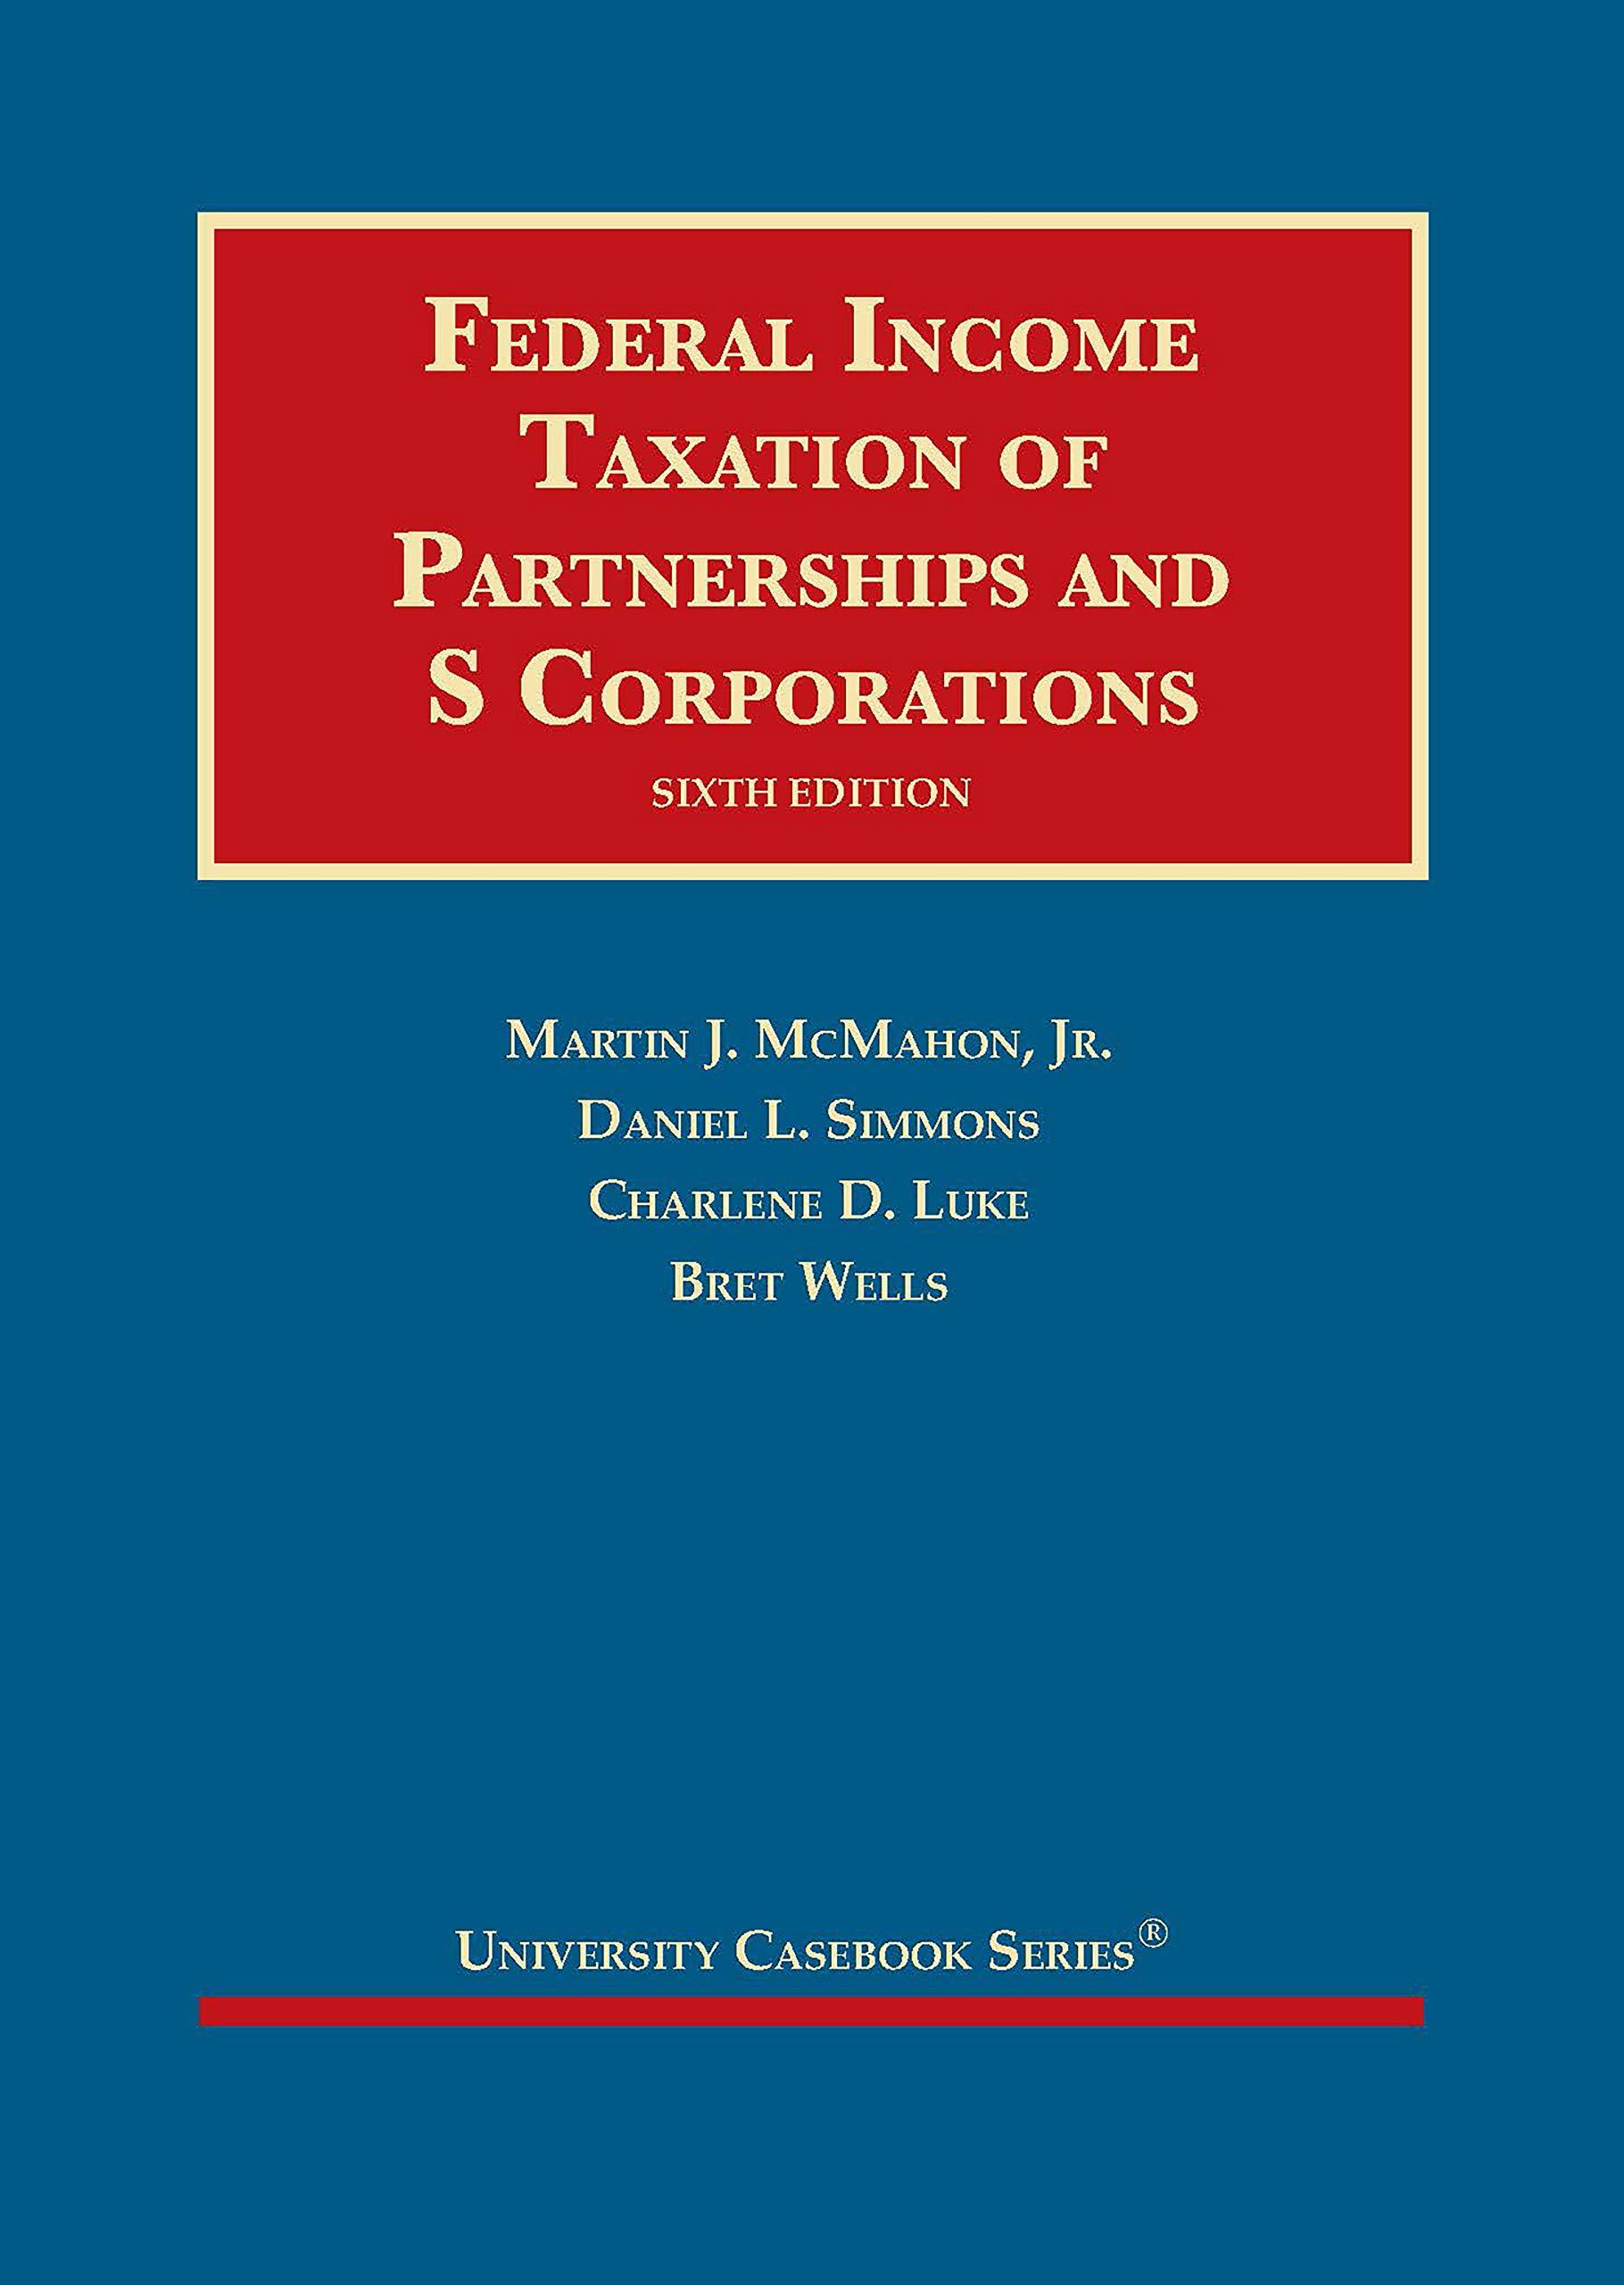 federal income taxation of partnerships and s corporations 6th edition martin mcmahon jr., daniel simmons,